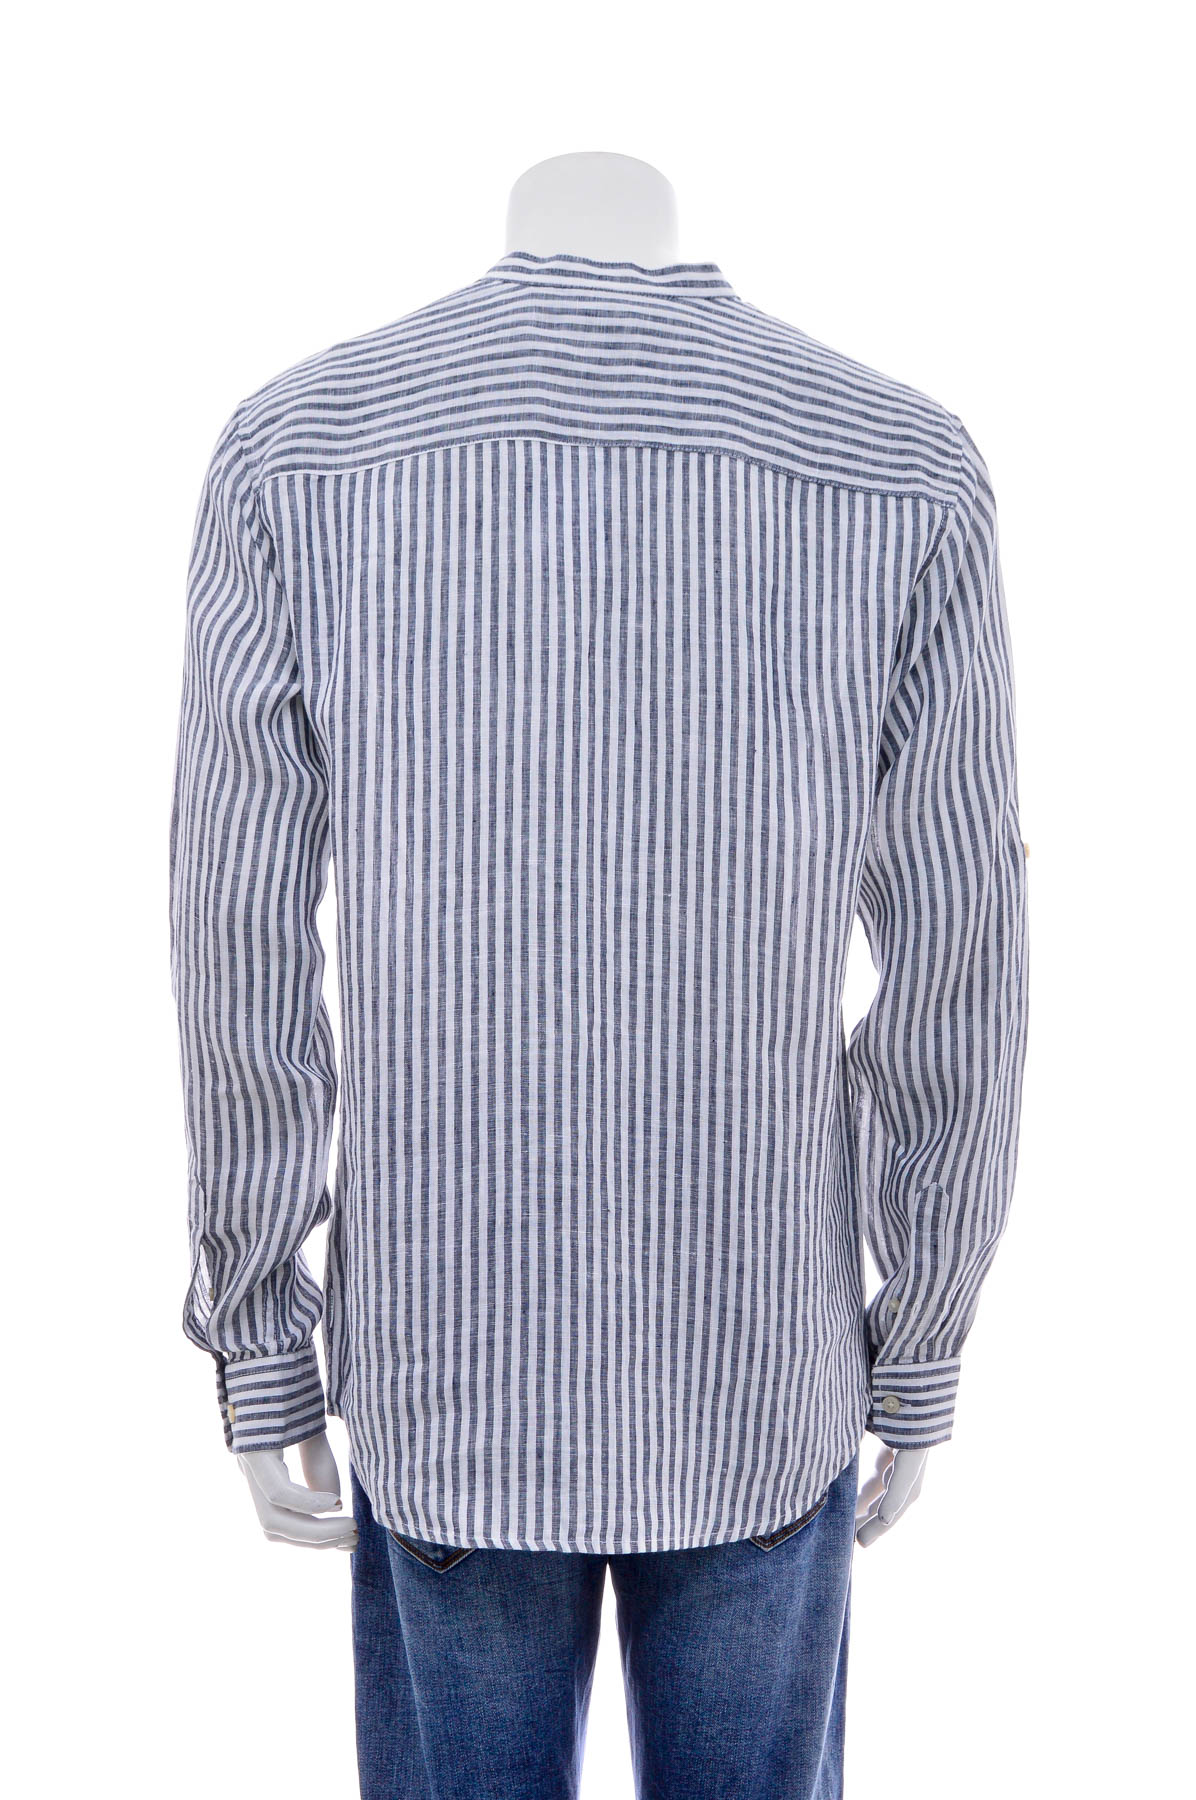 Men's shirt - ONLY & SONS - 1